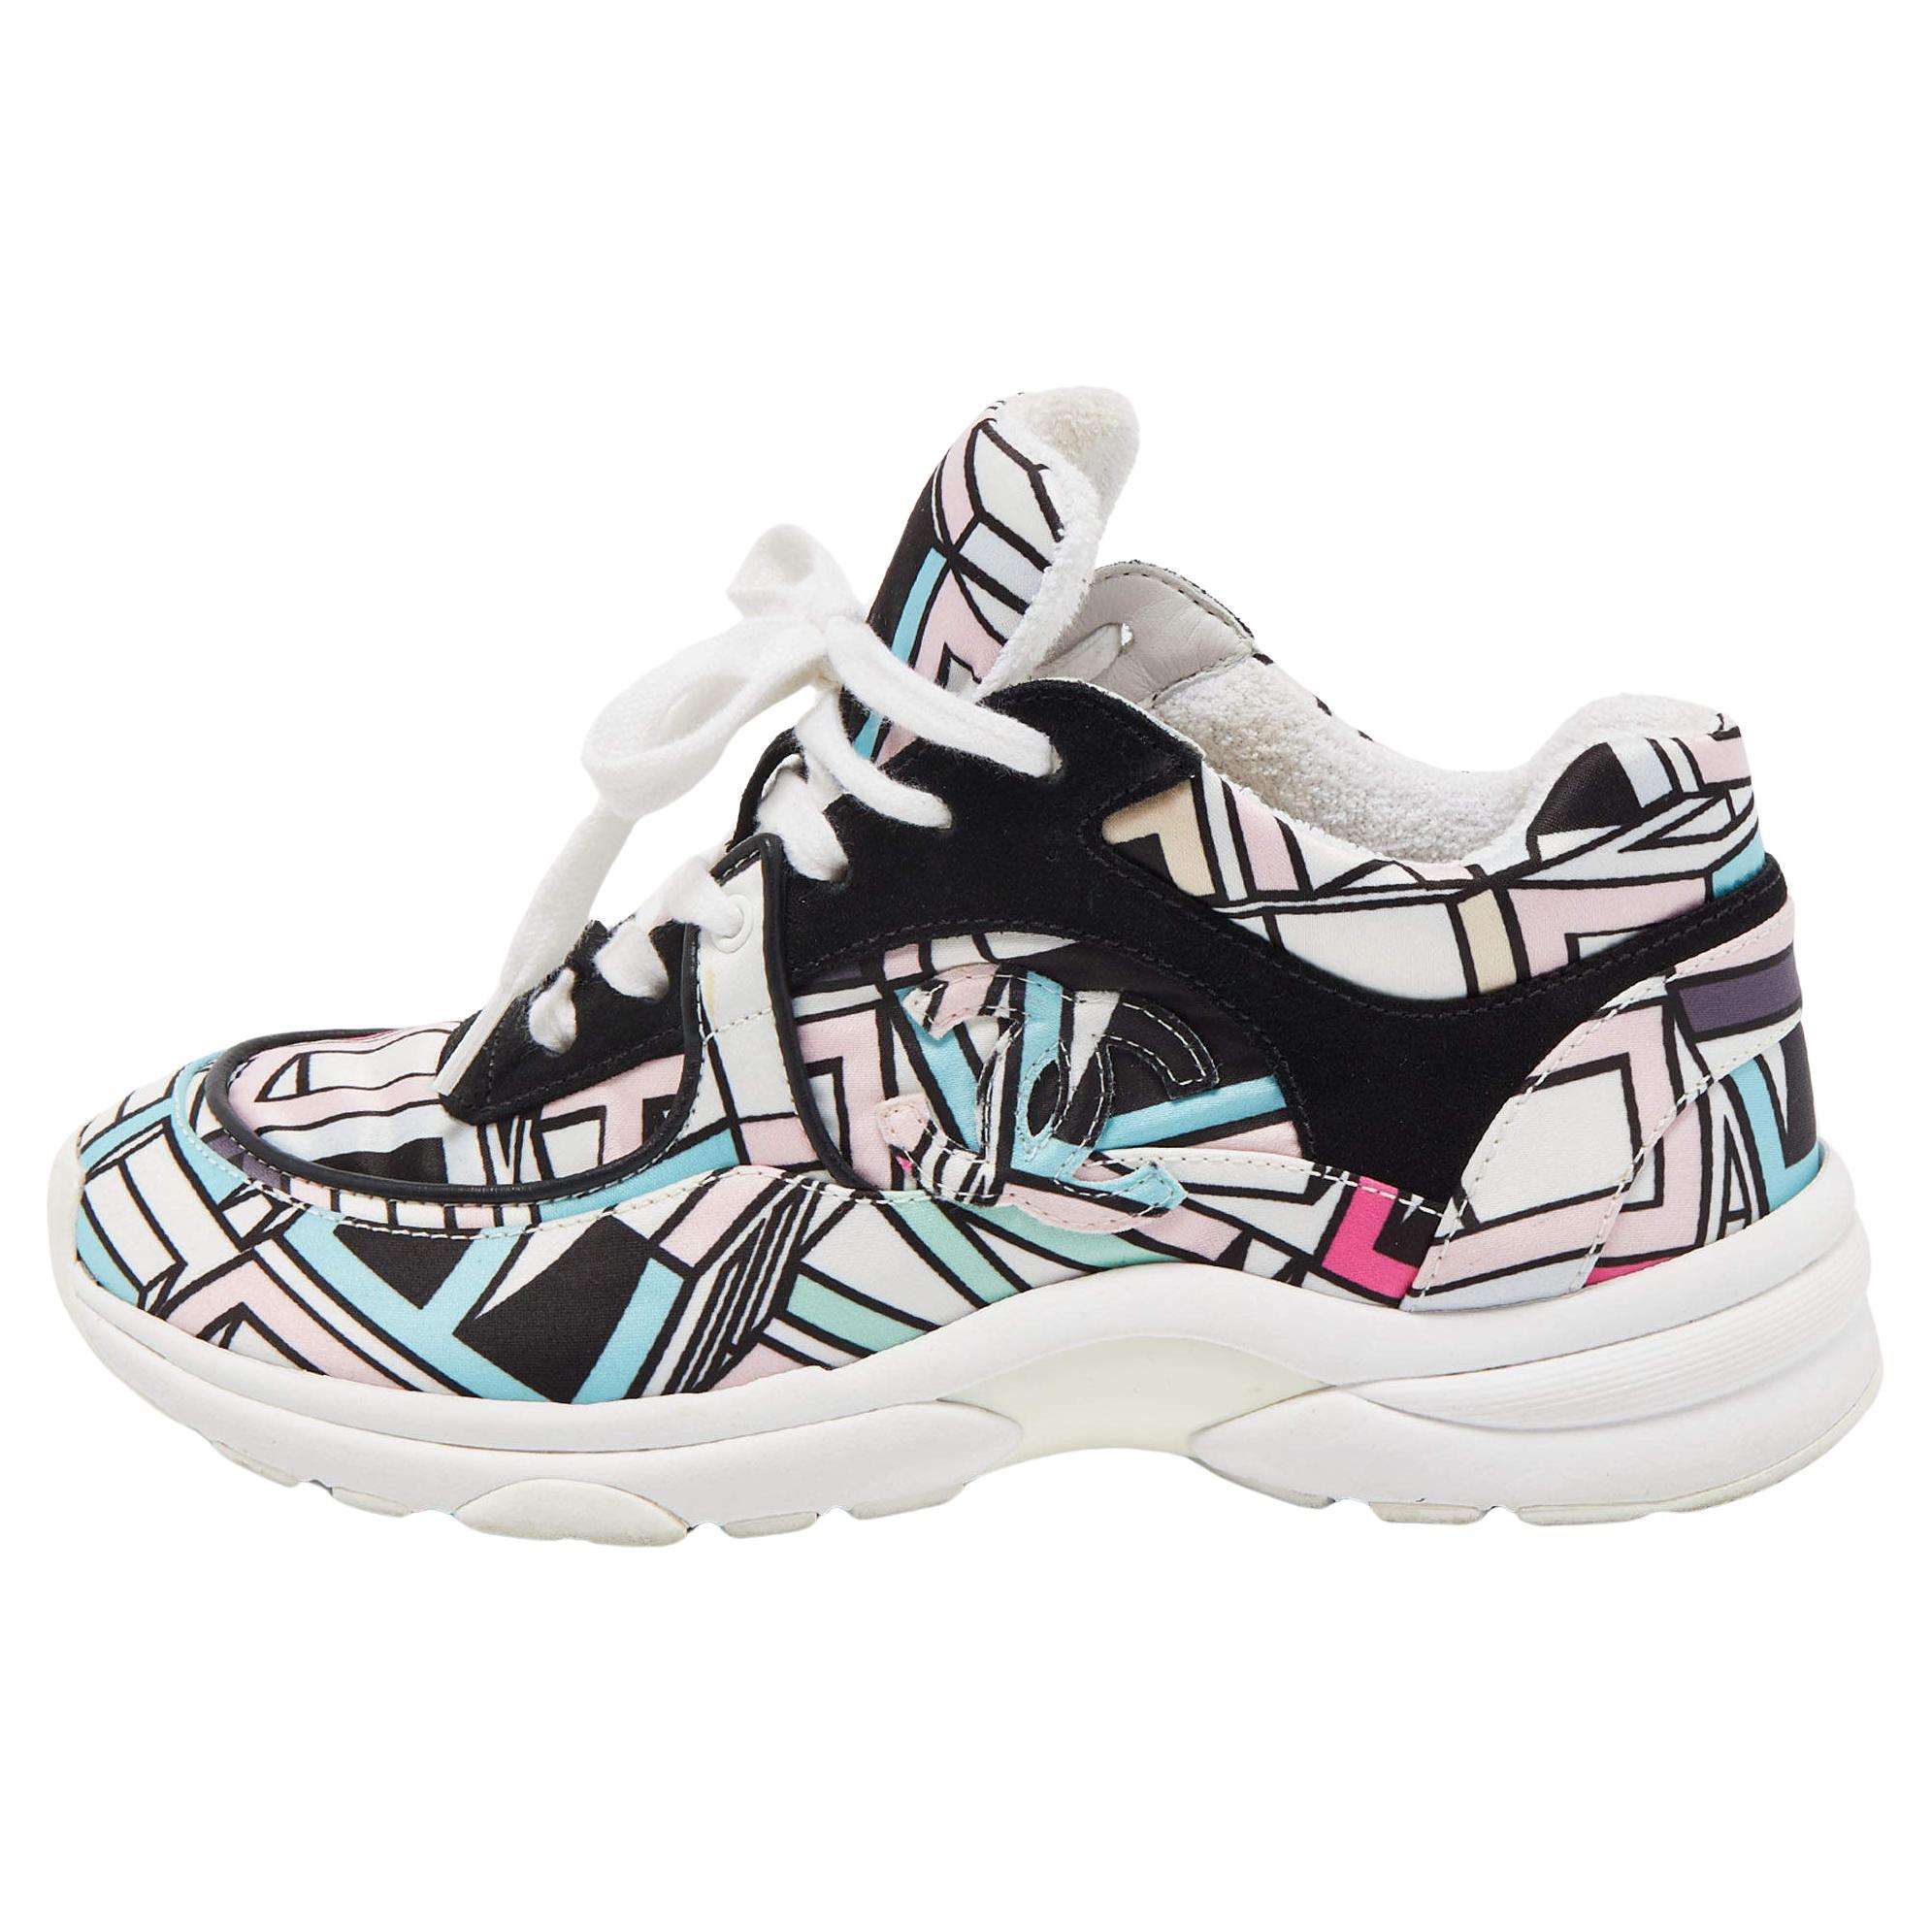 Chanel Multicolor Abstract Print Satin and Suede CC Logo Trainer Low Top Sneaker